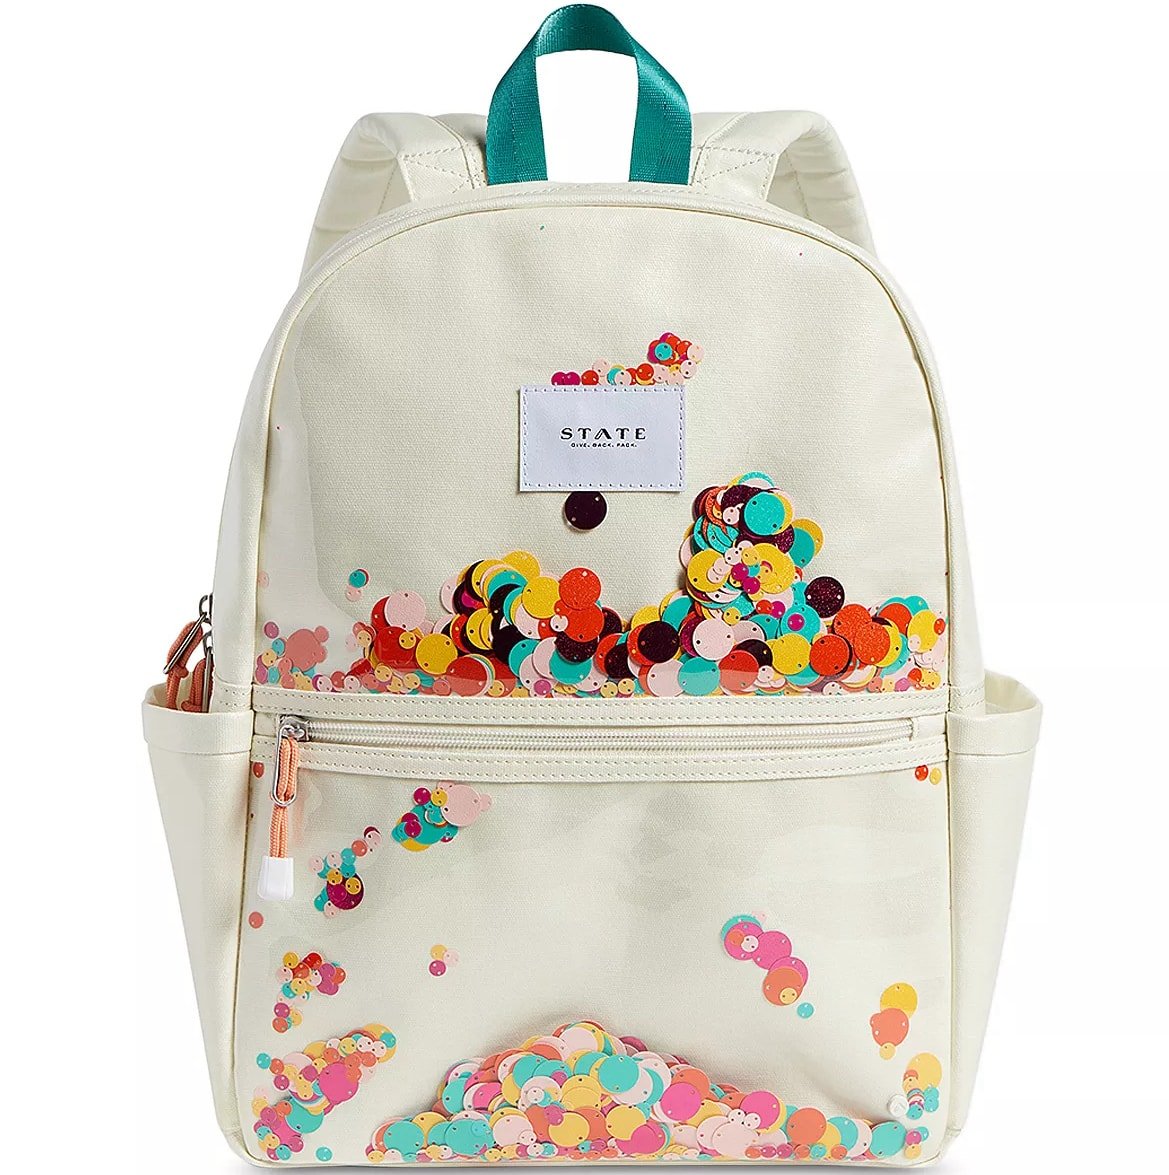 Beige backpack with colorful confetti 